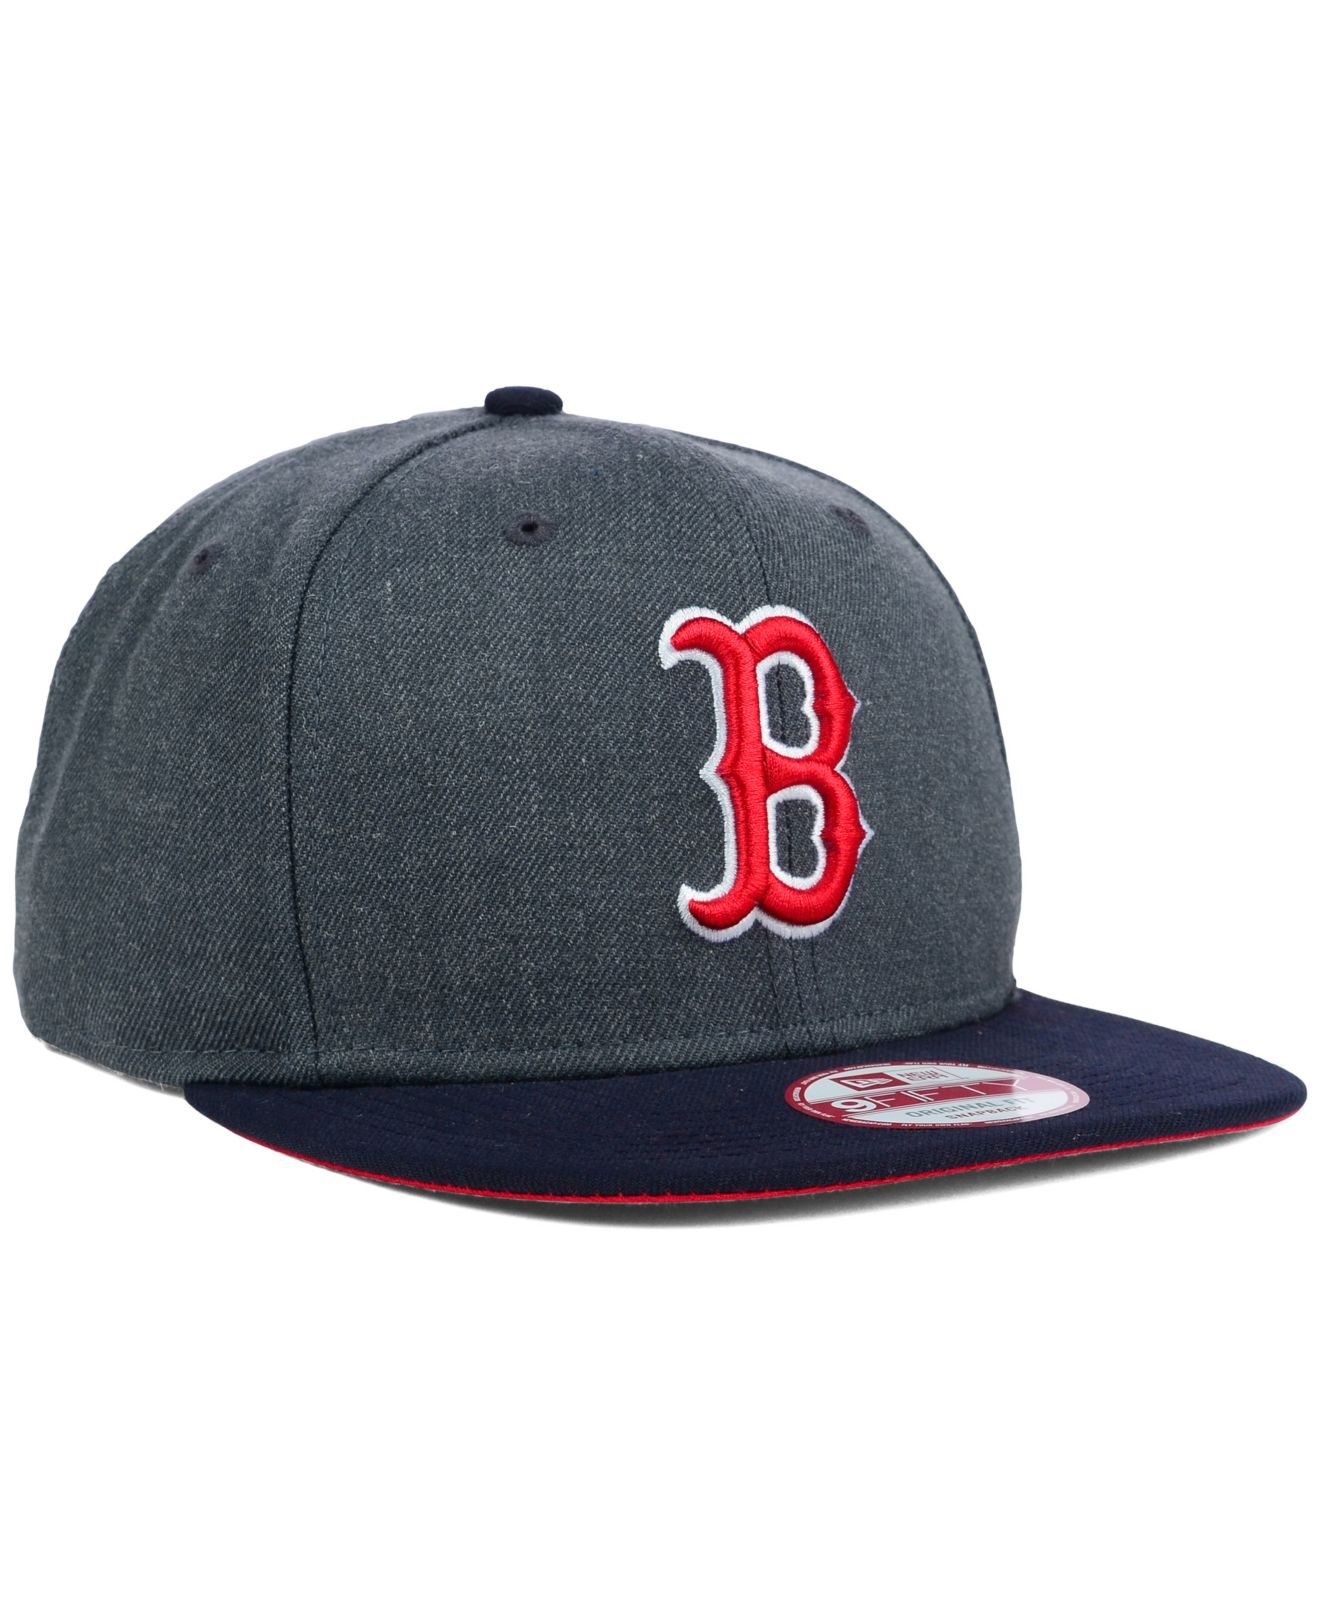 Lyst - Ktz Boston Red Sox 2-Tone Action 9Fifty Snapback Cap in Gray for Men